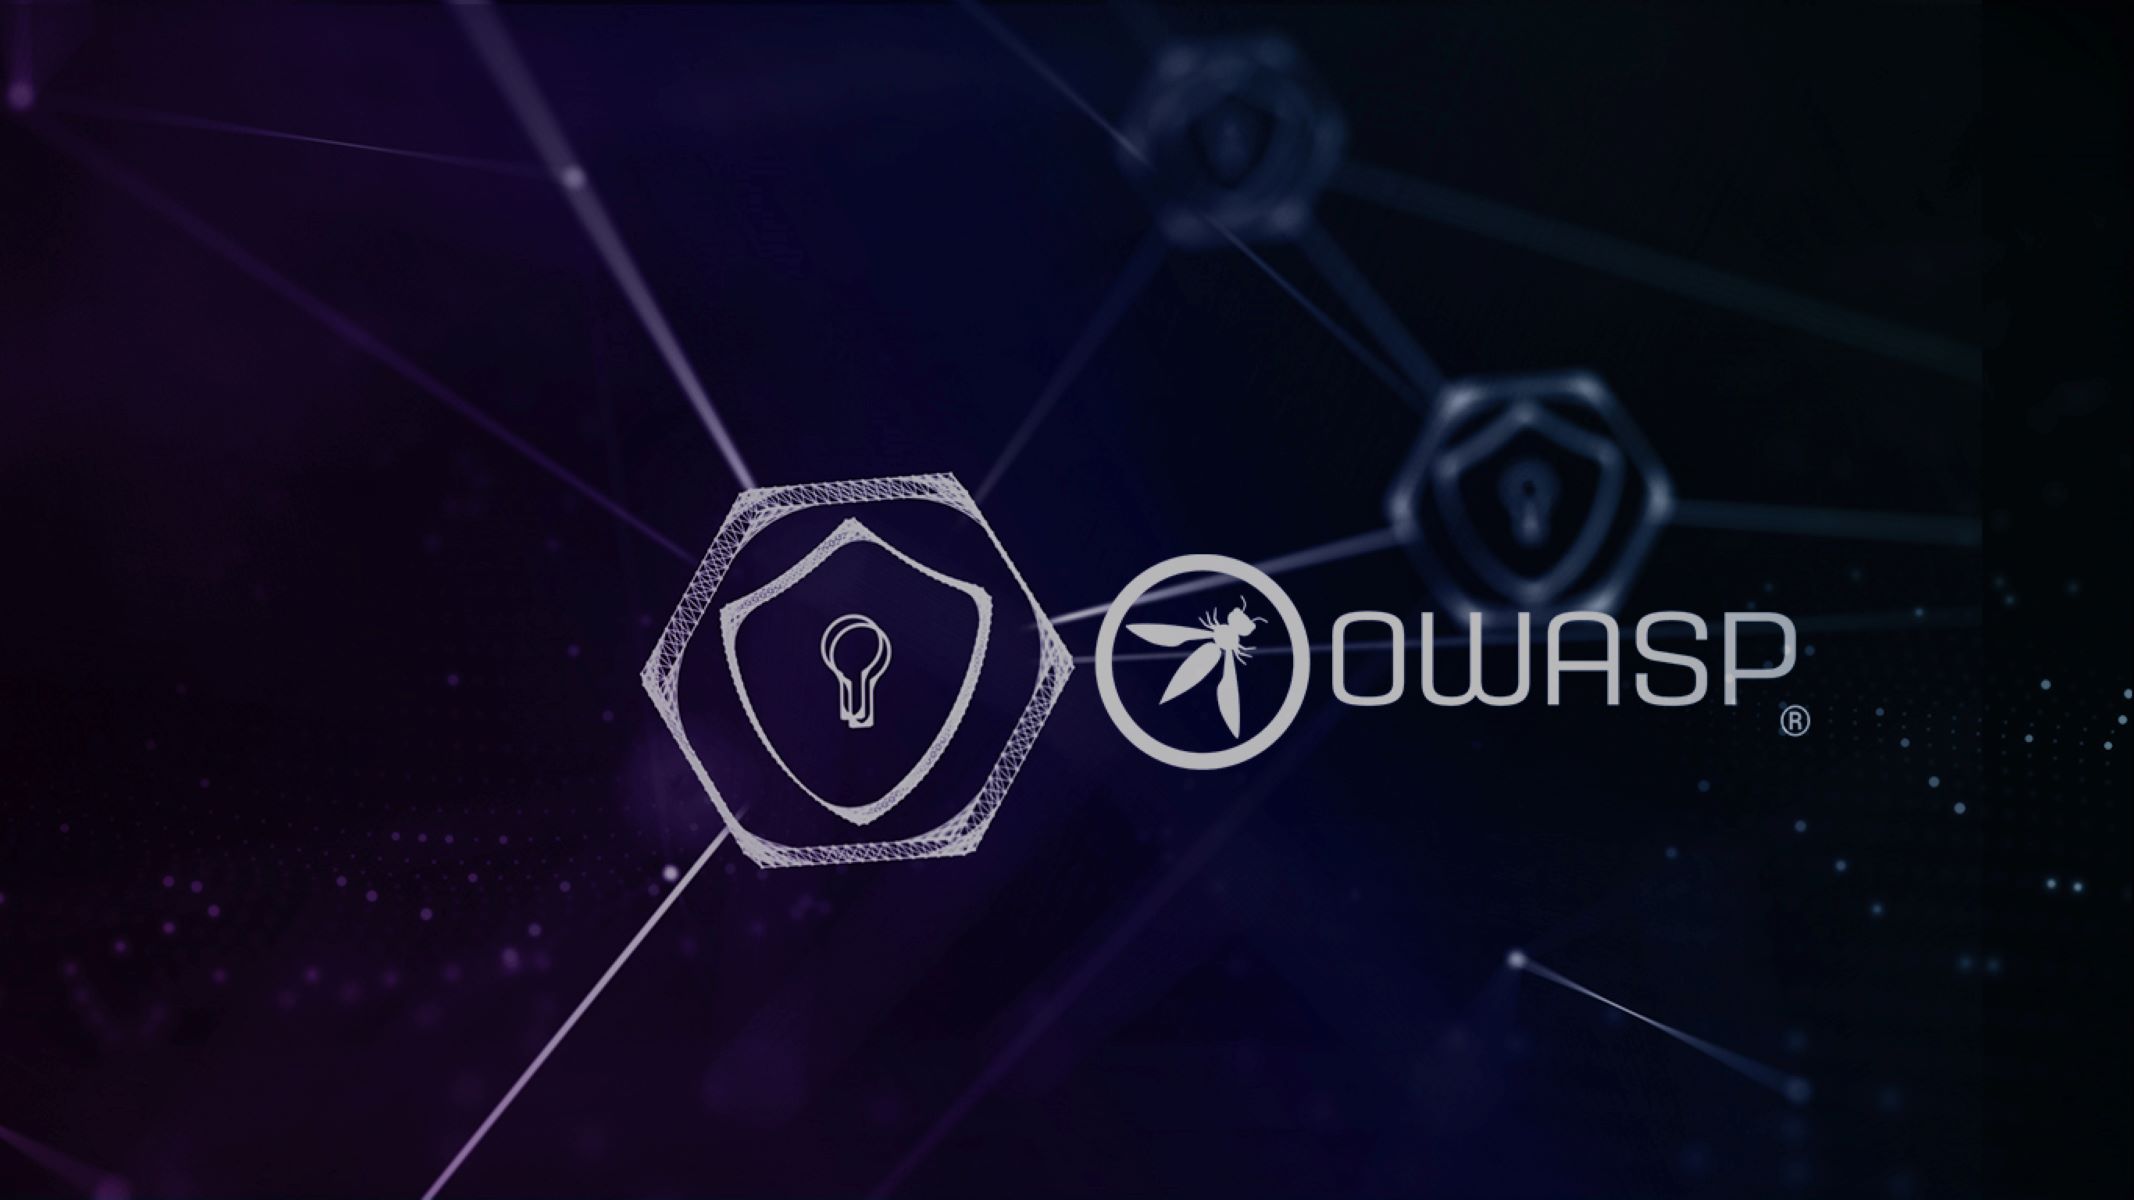 What Is The OWASP Internet Of Things Project?